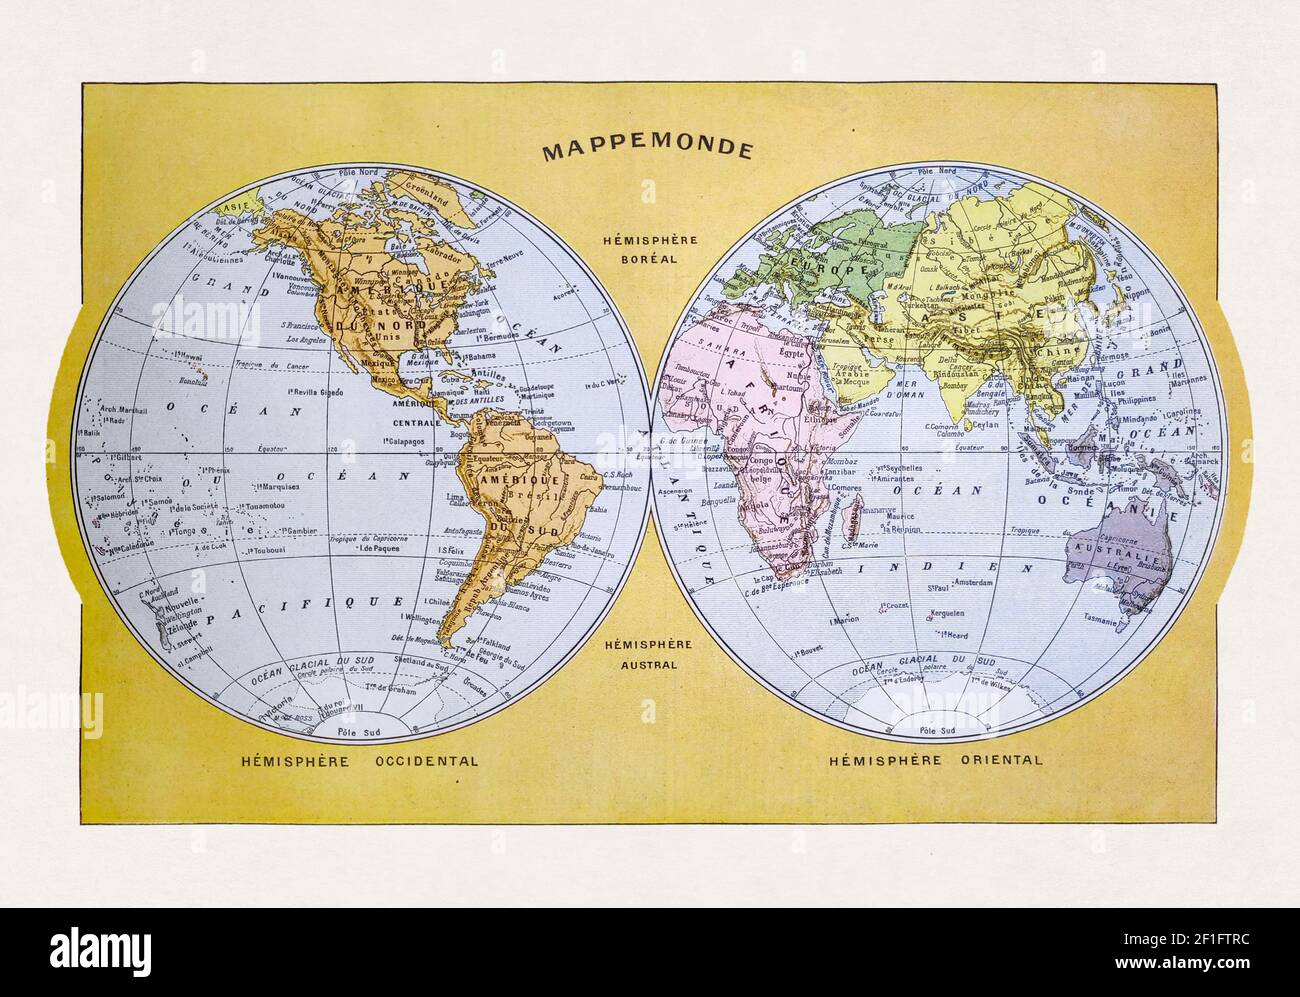 Old world map printed in the french dictionary 'Dictionnaire complet illustré' by the editor Larousse in 1889. Stock Photo